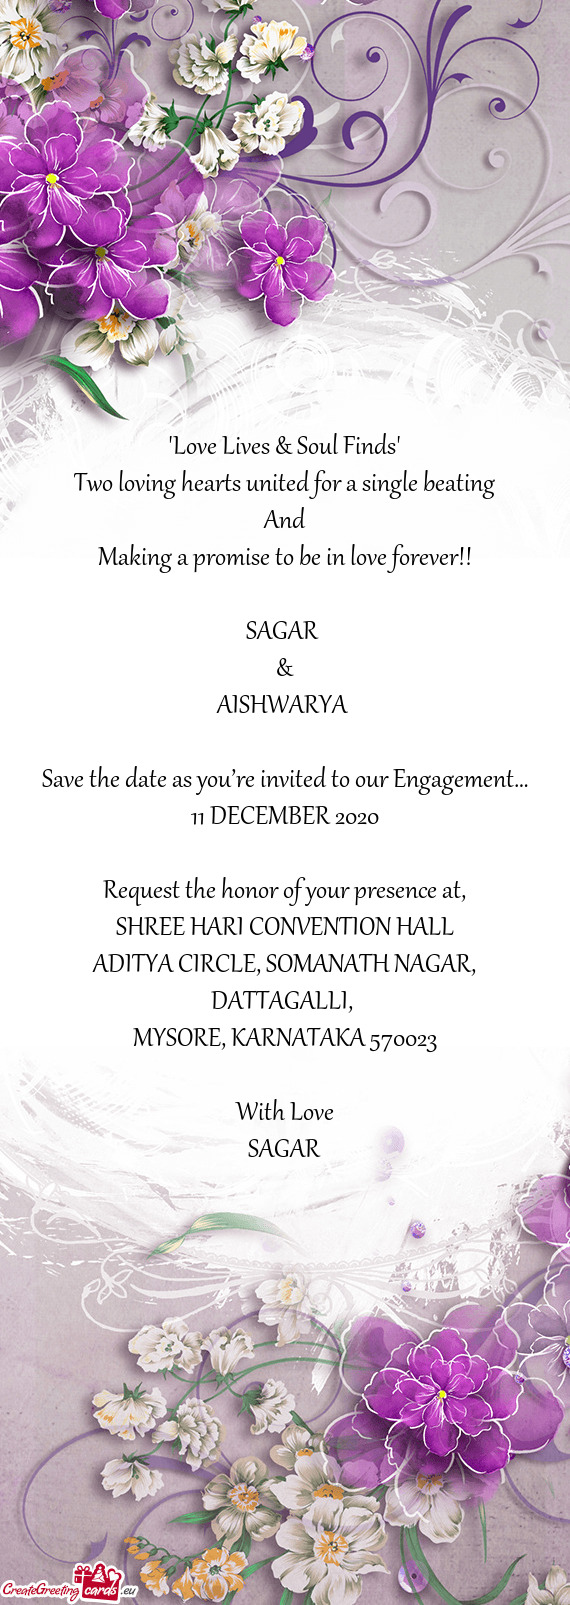 Save the date as you’re invited to our Engagement…